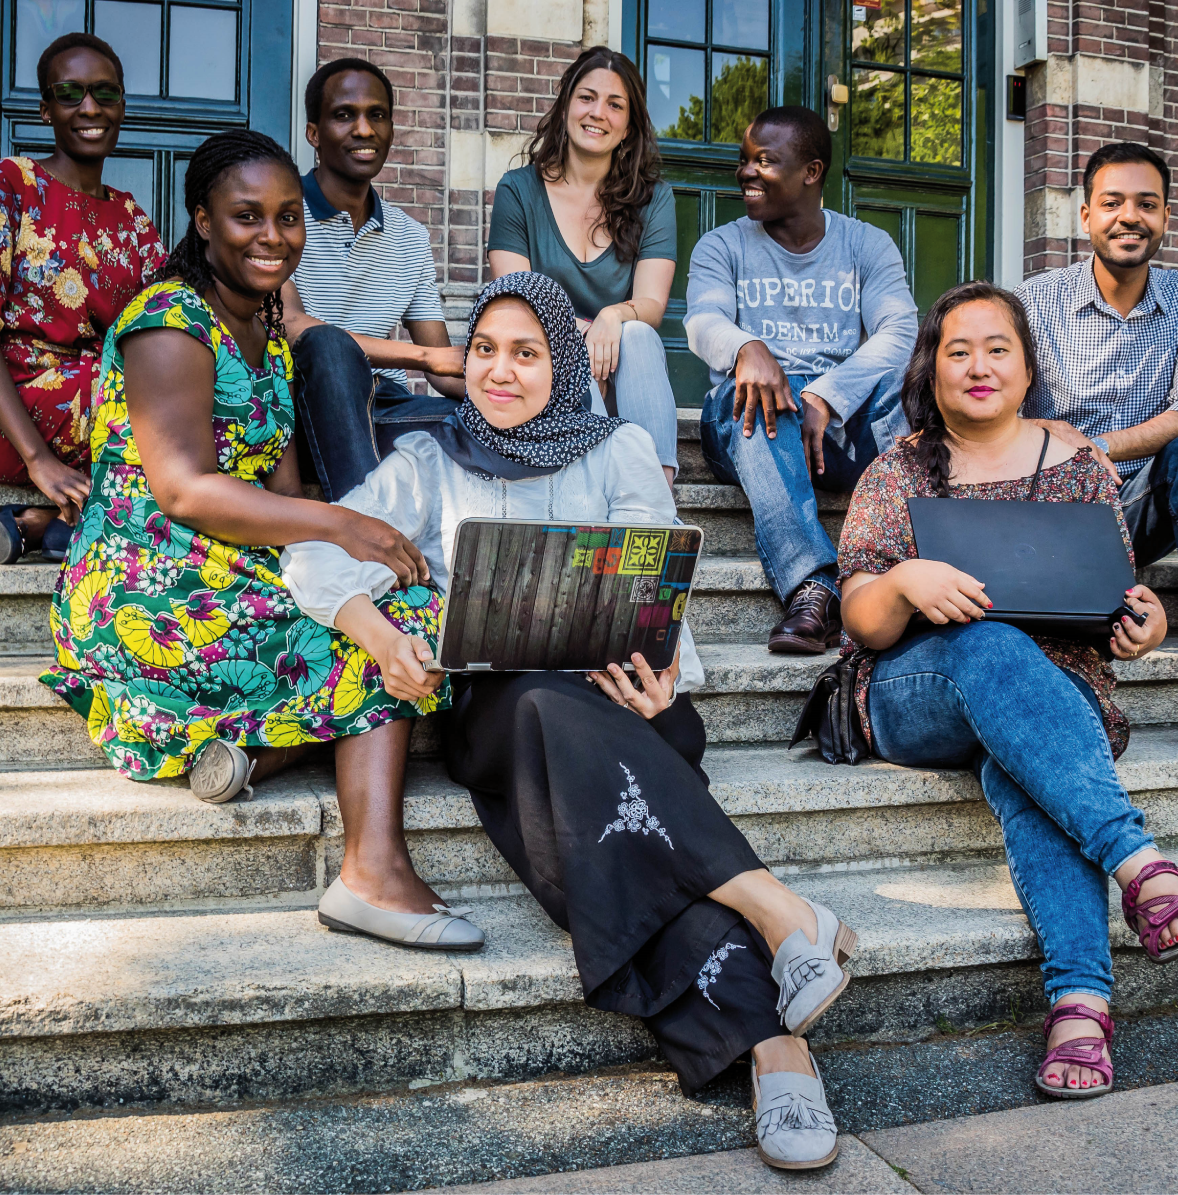 The picture shows a group of international diverse students sitting outside on a staircase